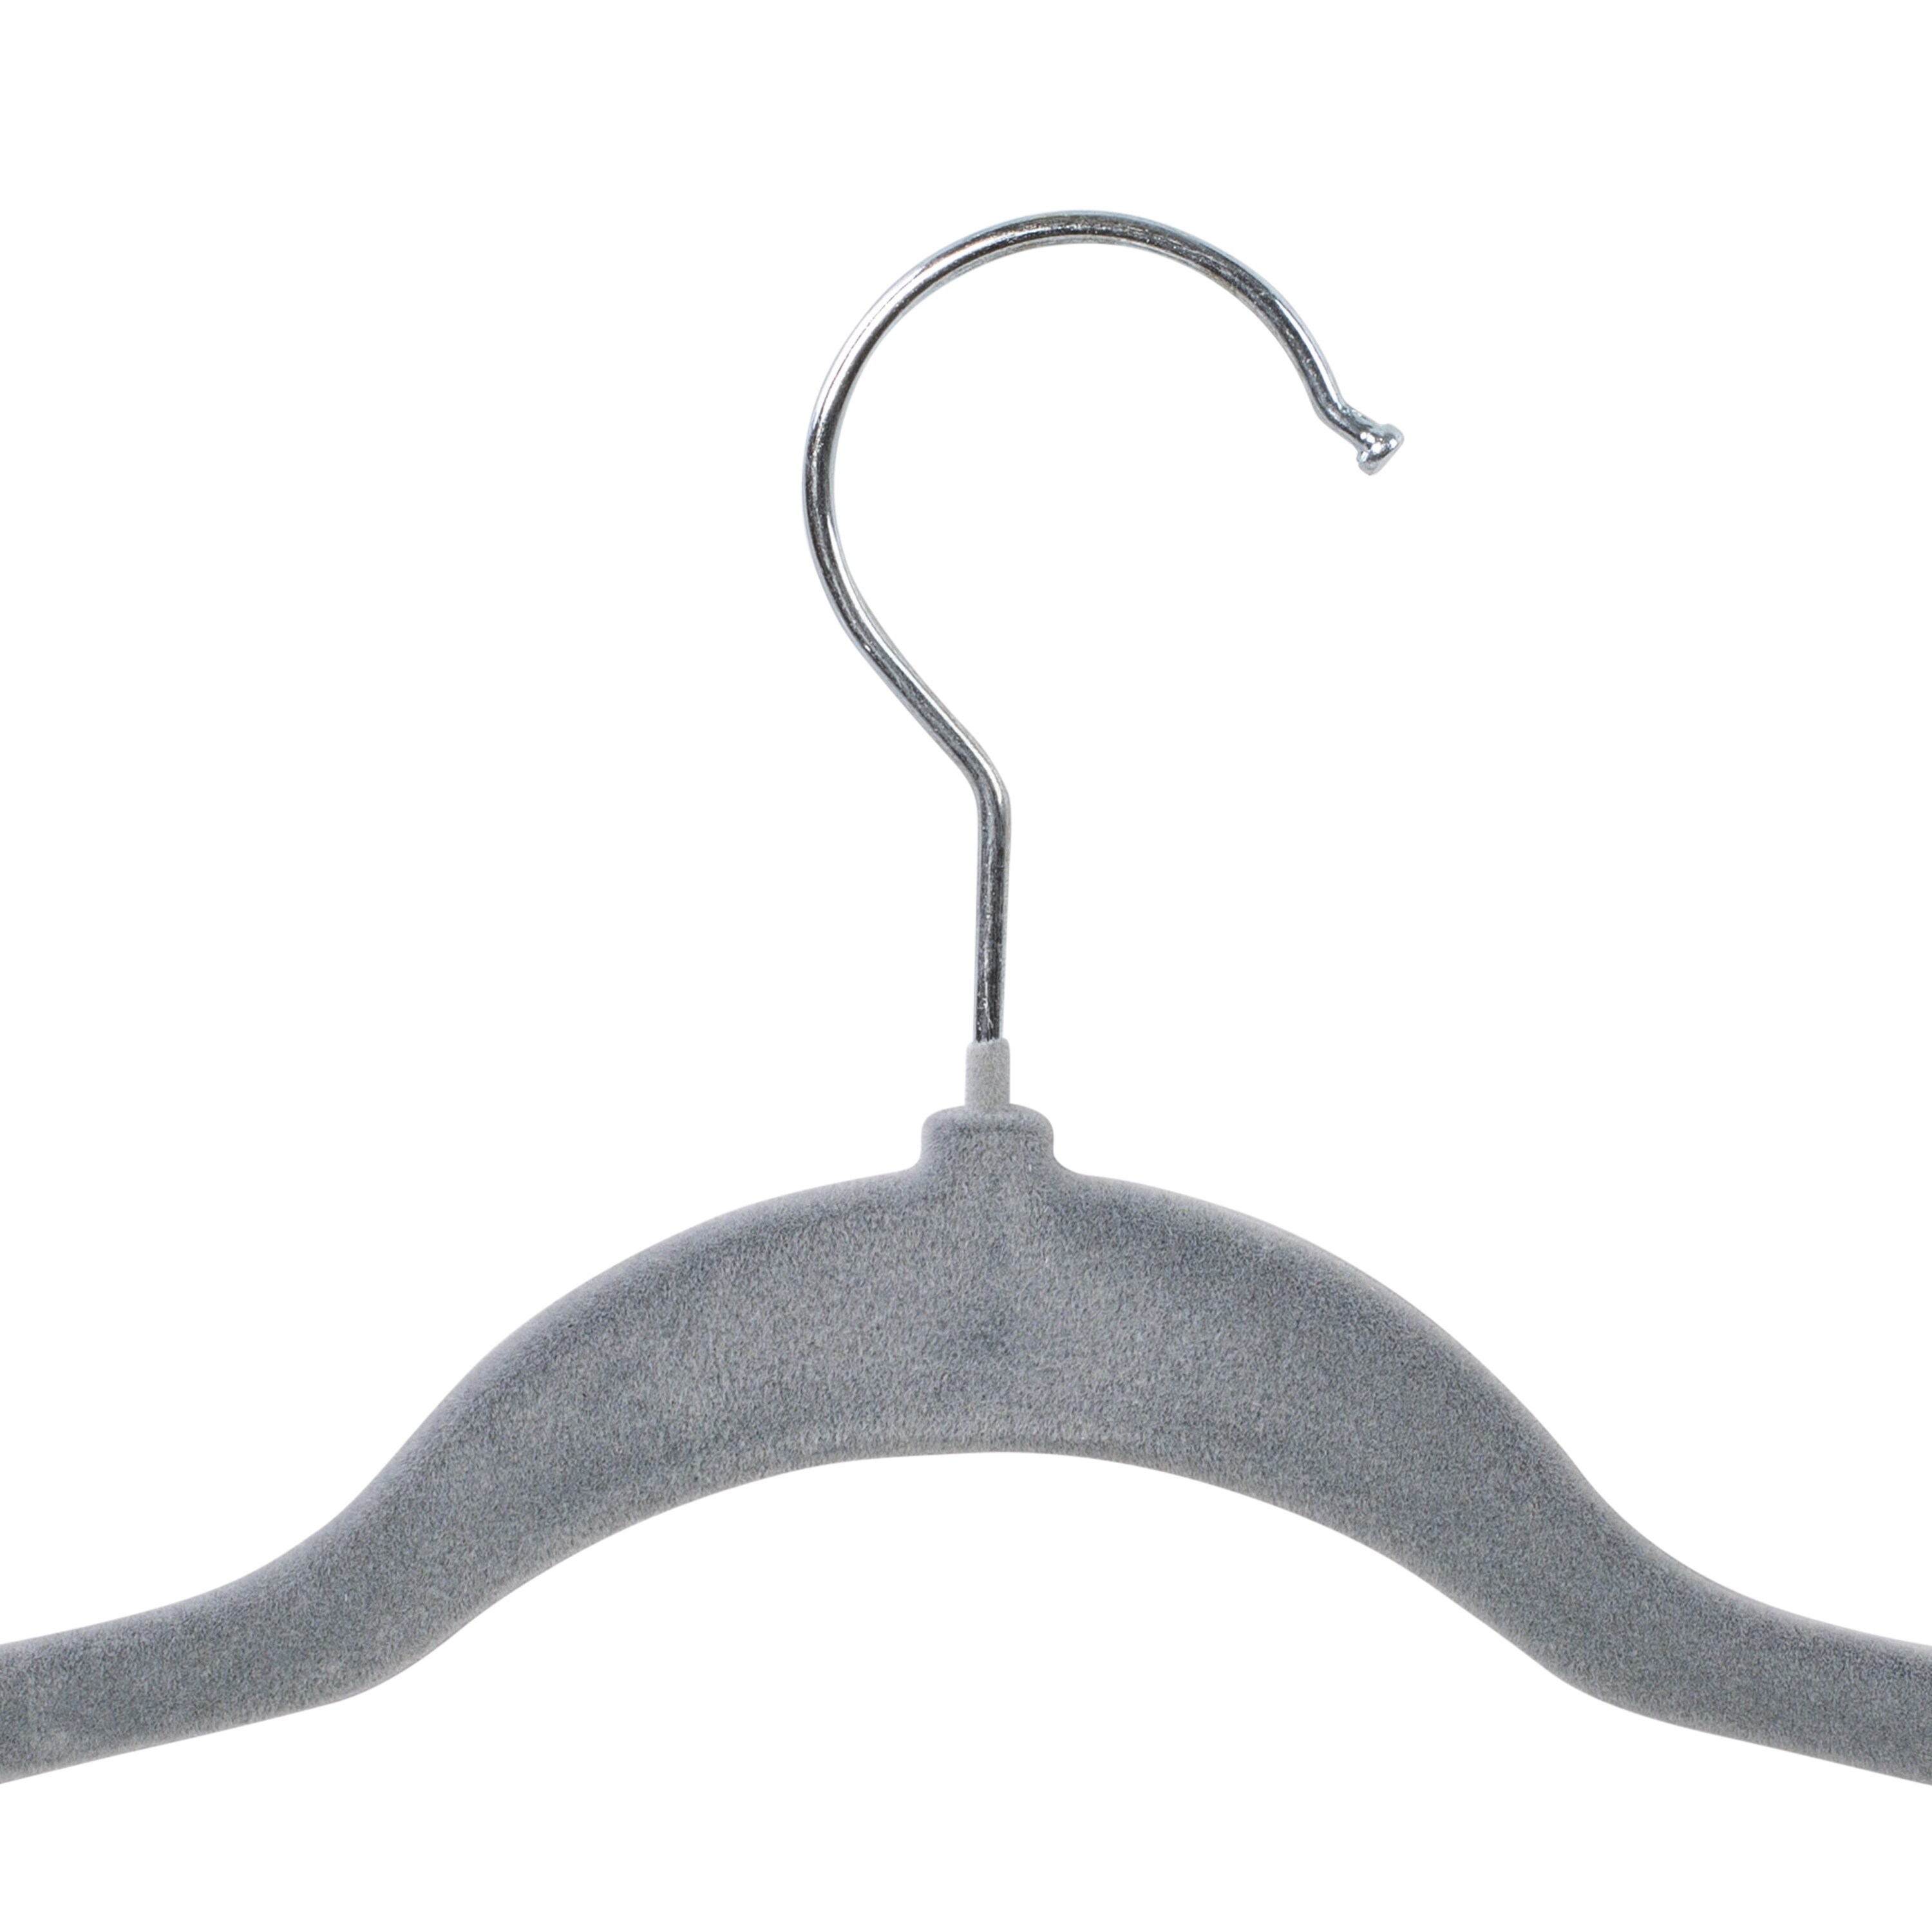 https://ak1.ostkcdn.com/images/products/is/images/direct/70b176b62d9fc99ef32a4a1c13af9e28c45f2867/Plastic-and-Velvet-Non-Slip-Hangers-%2825-Pack%29.jpg